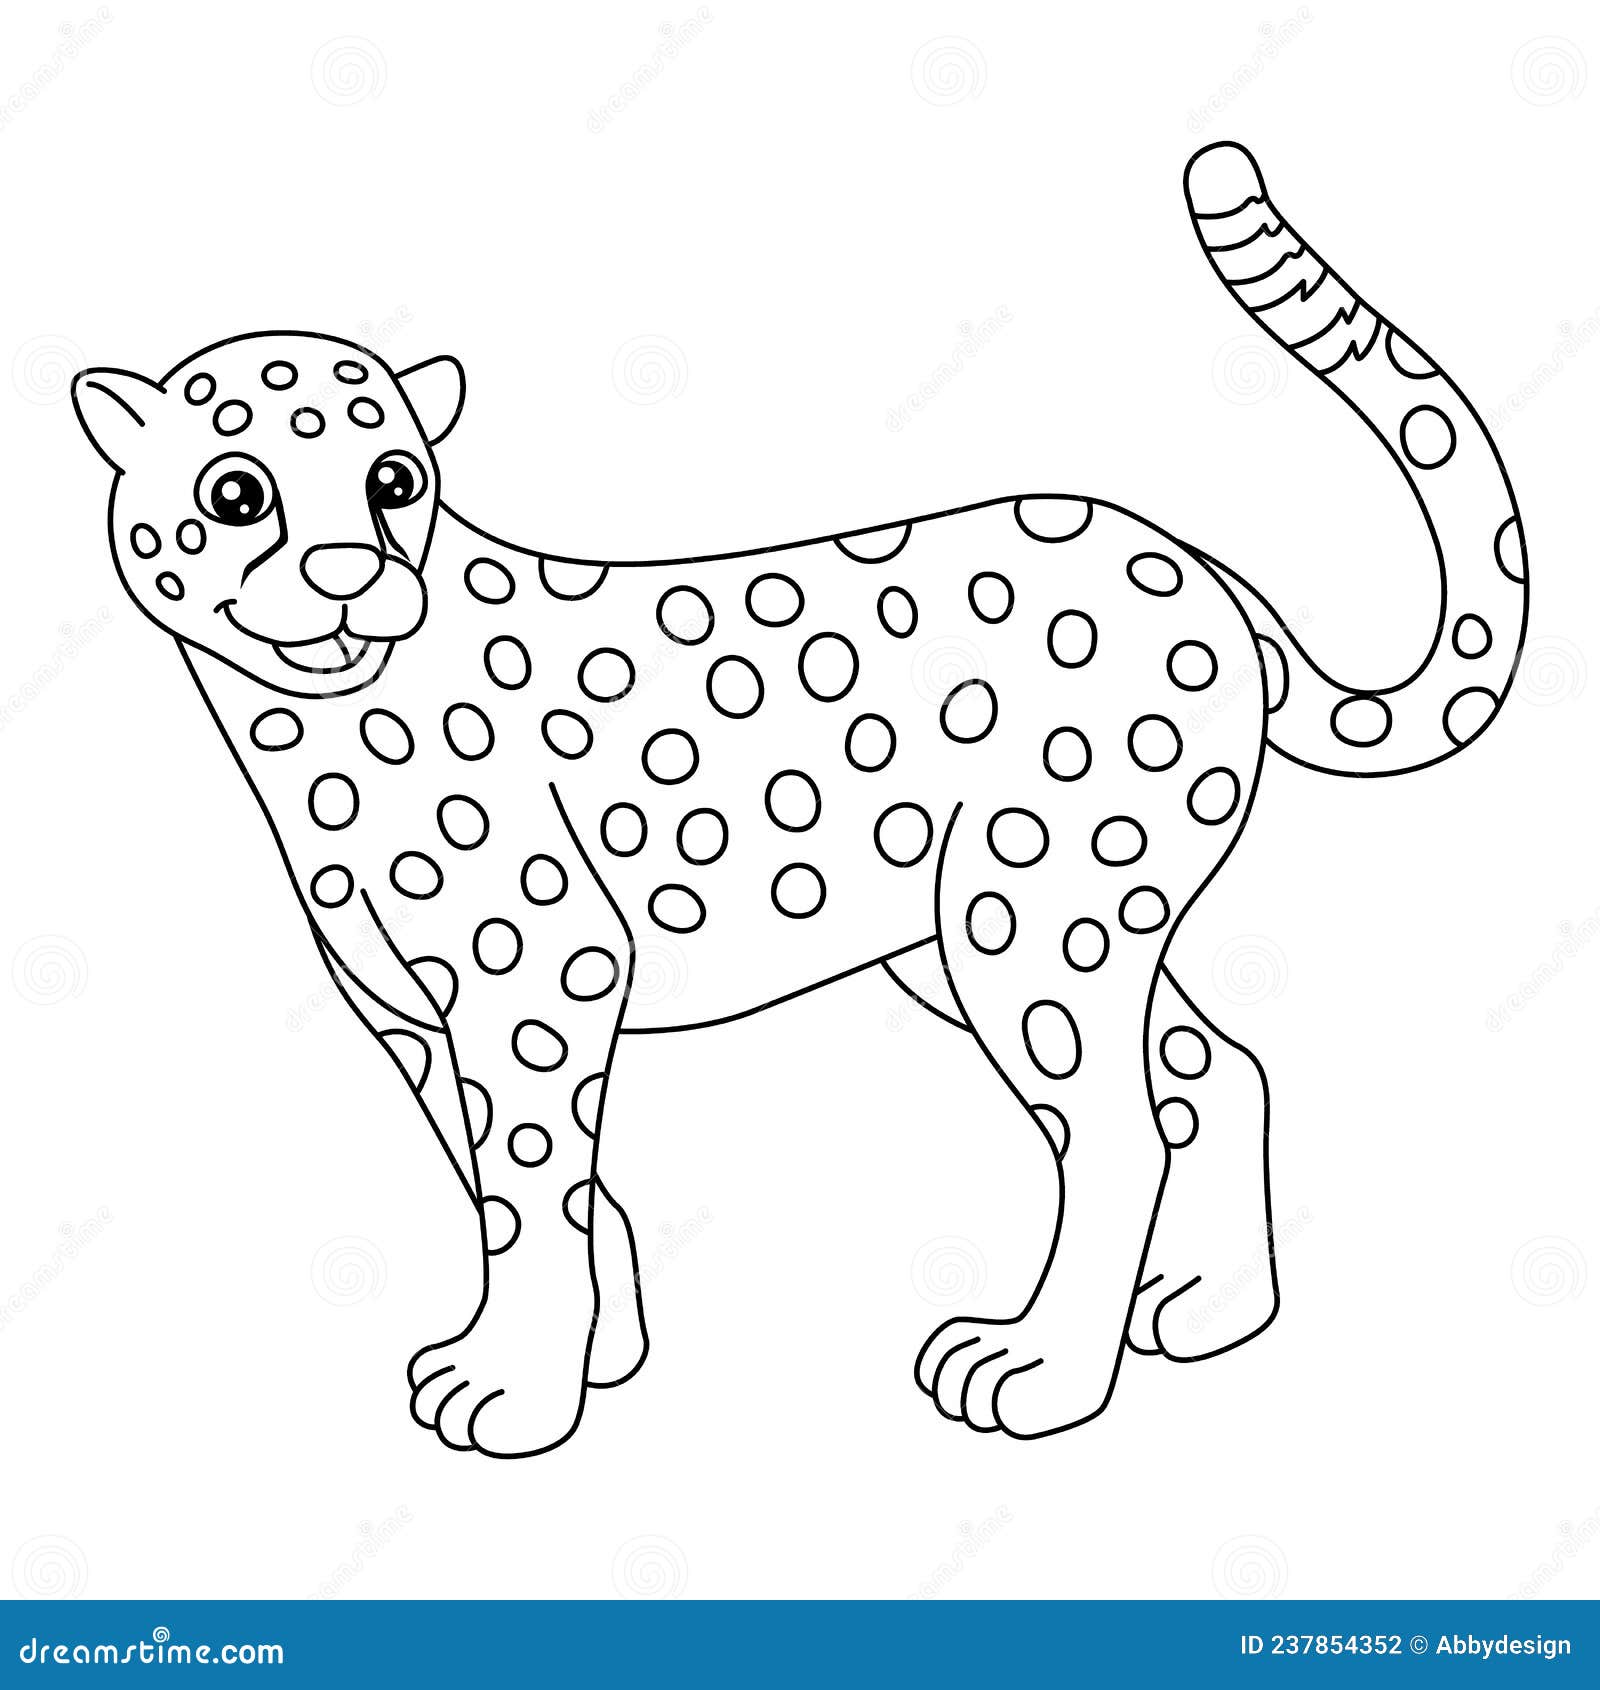 Cheetah coloring page isolated for kids stock vector